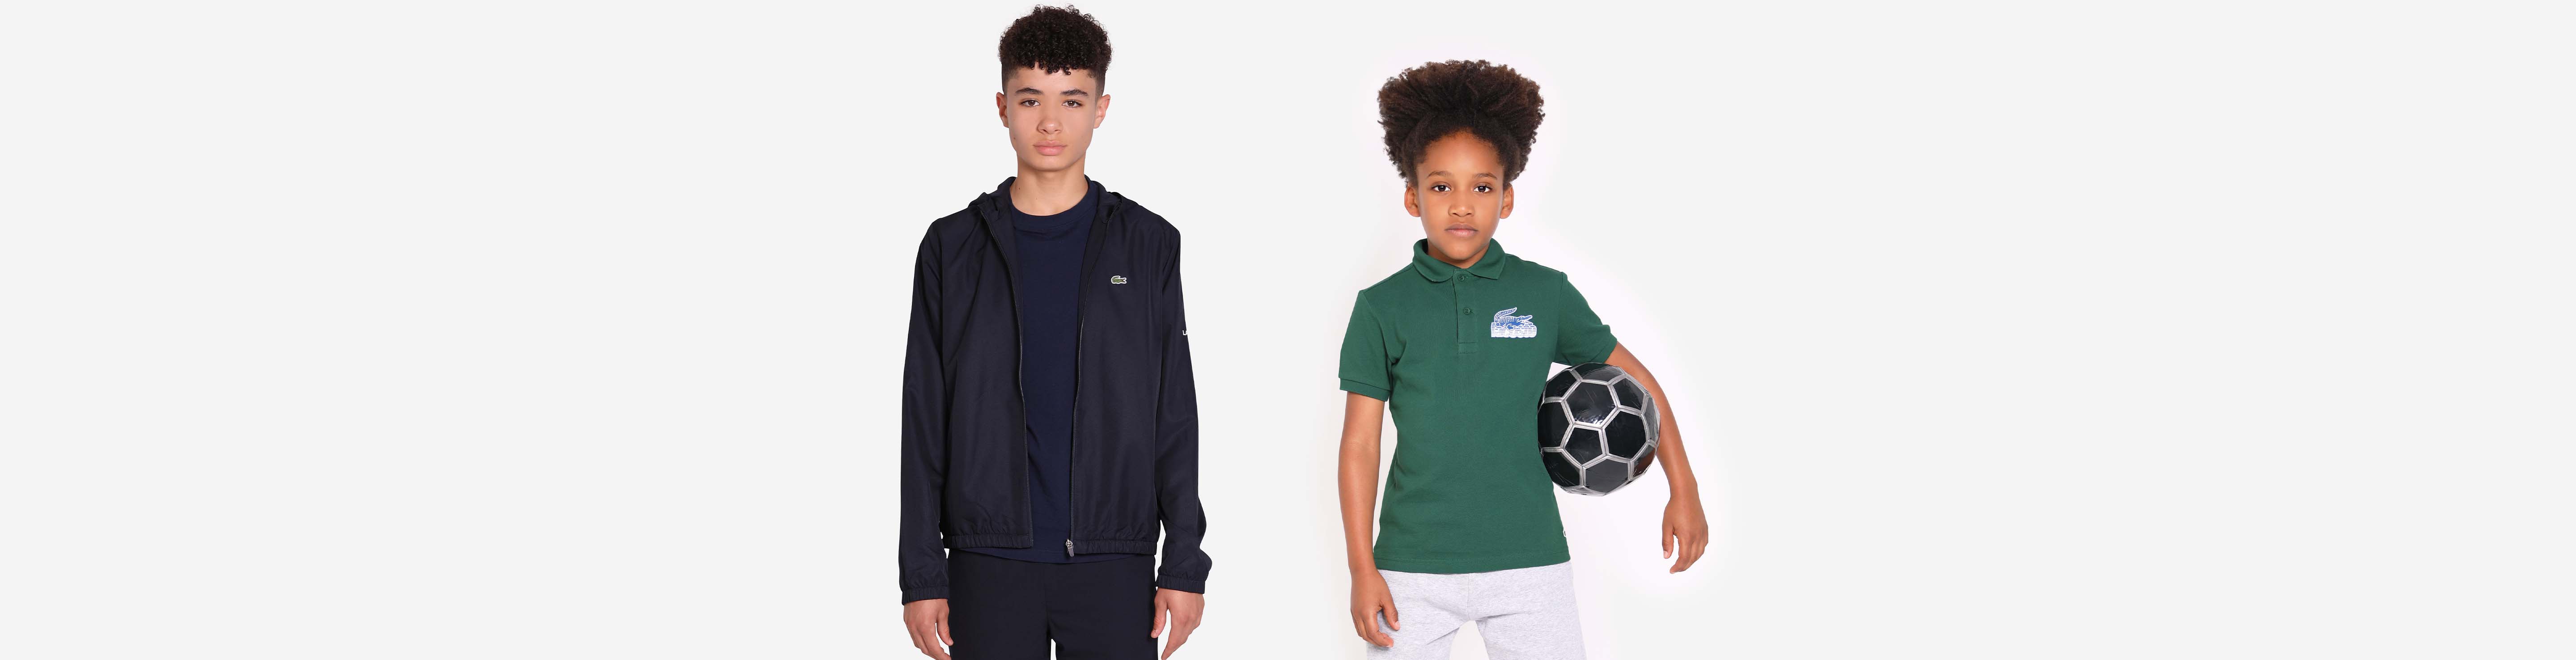 Clothes Lacoste Kids Childsplay US Clothing |